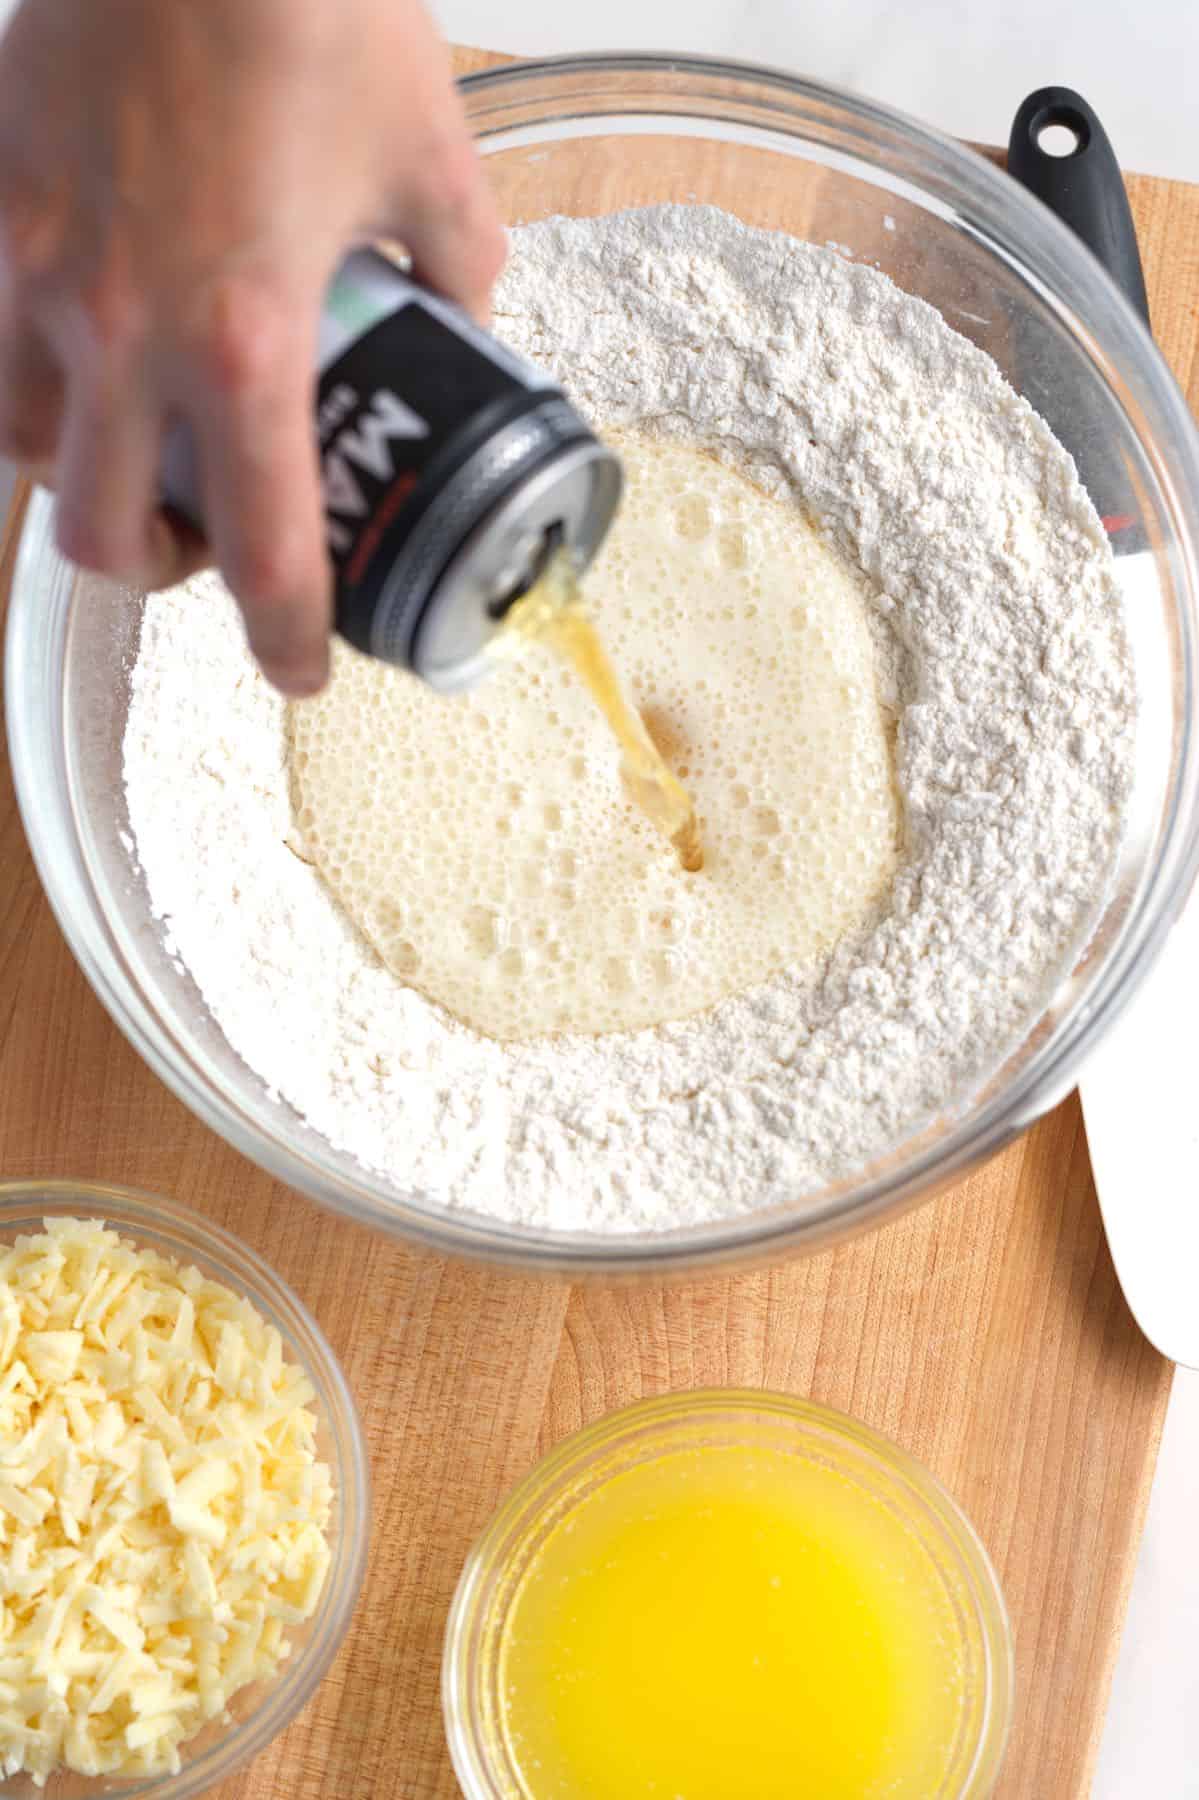 Making beer bread by pouring beer into a mixture of flour, sugar, and salt.